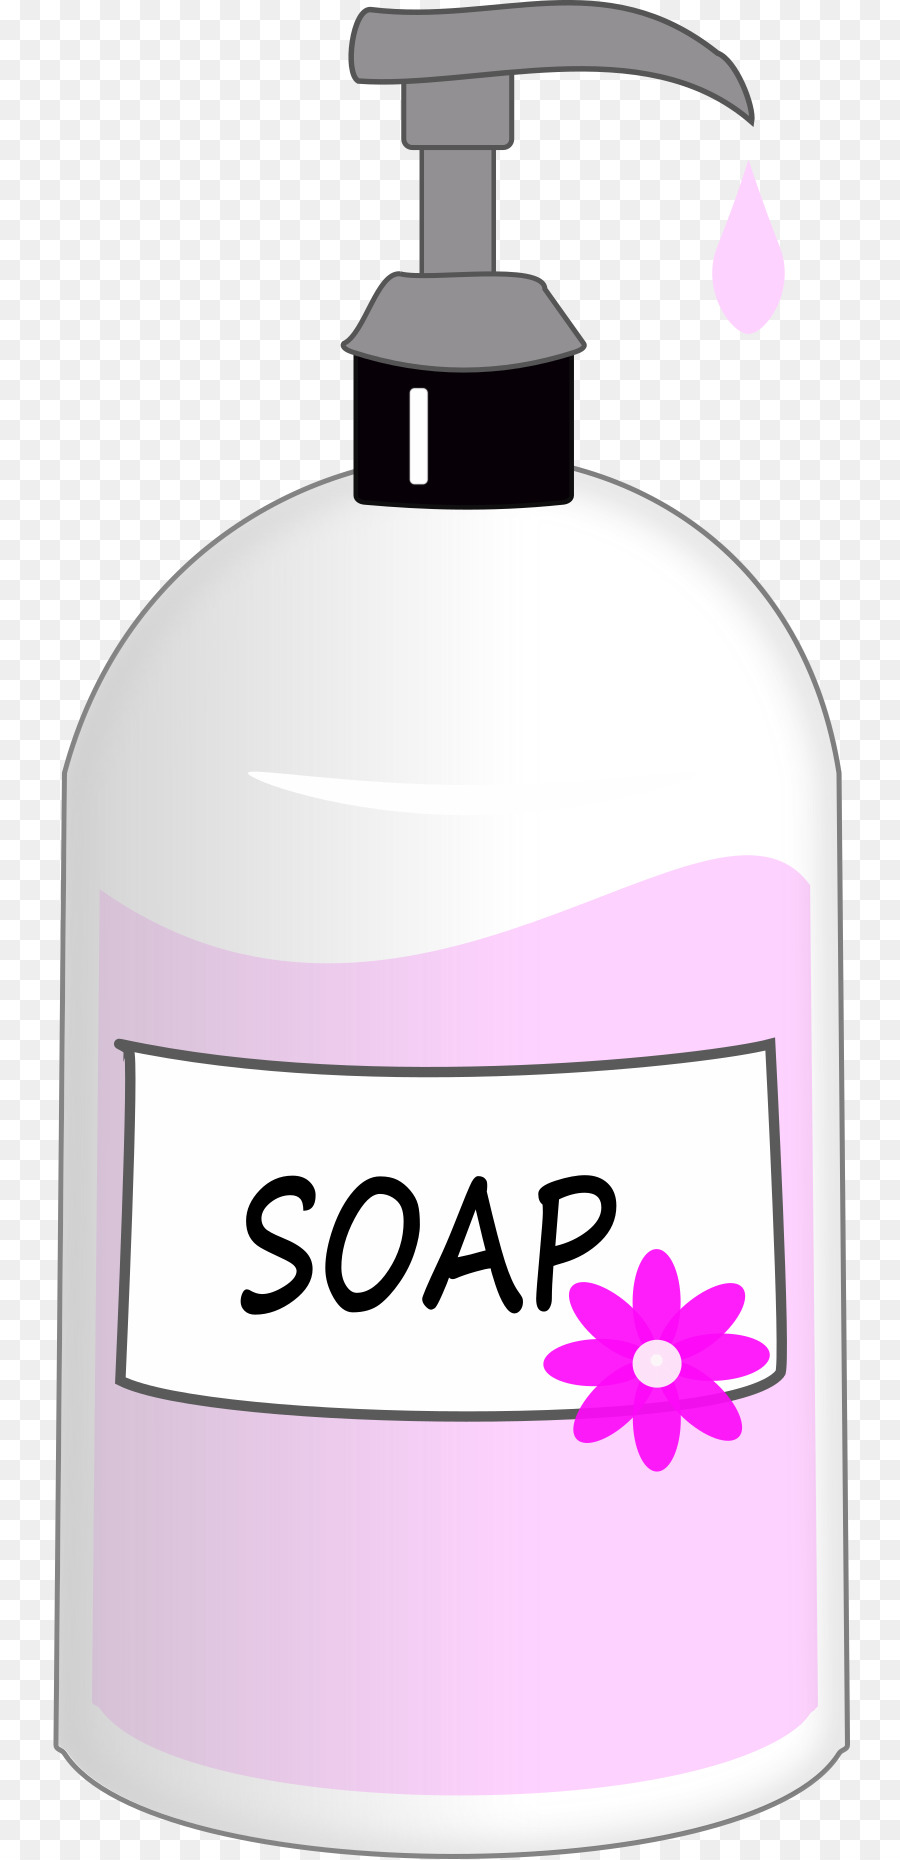 Soap clipart soap pump. Water bottle drawing png